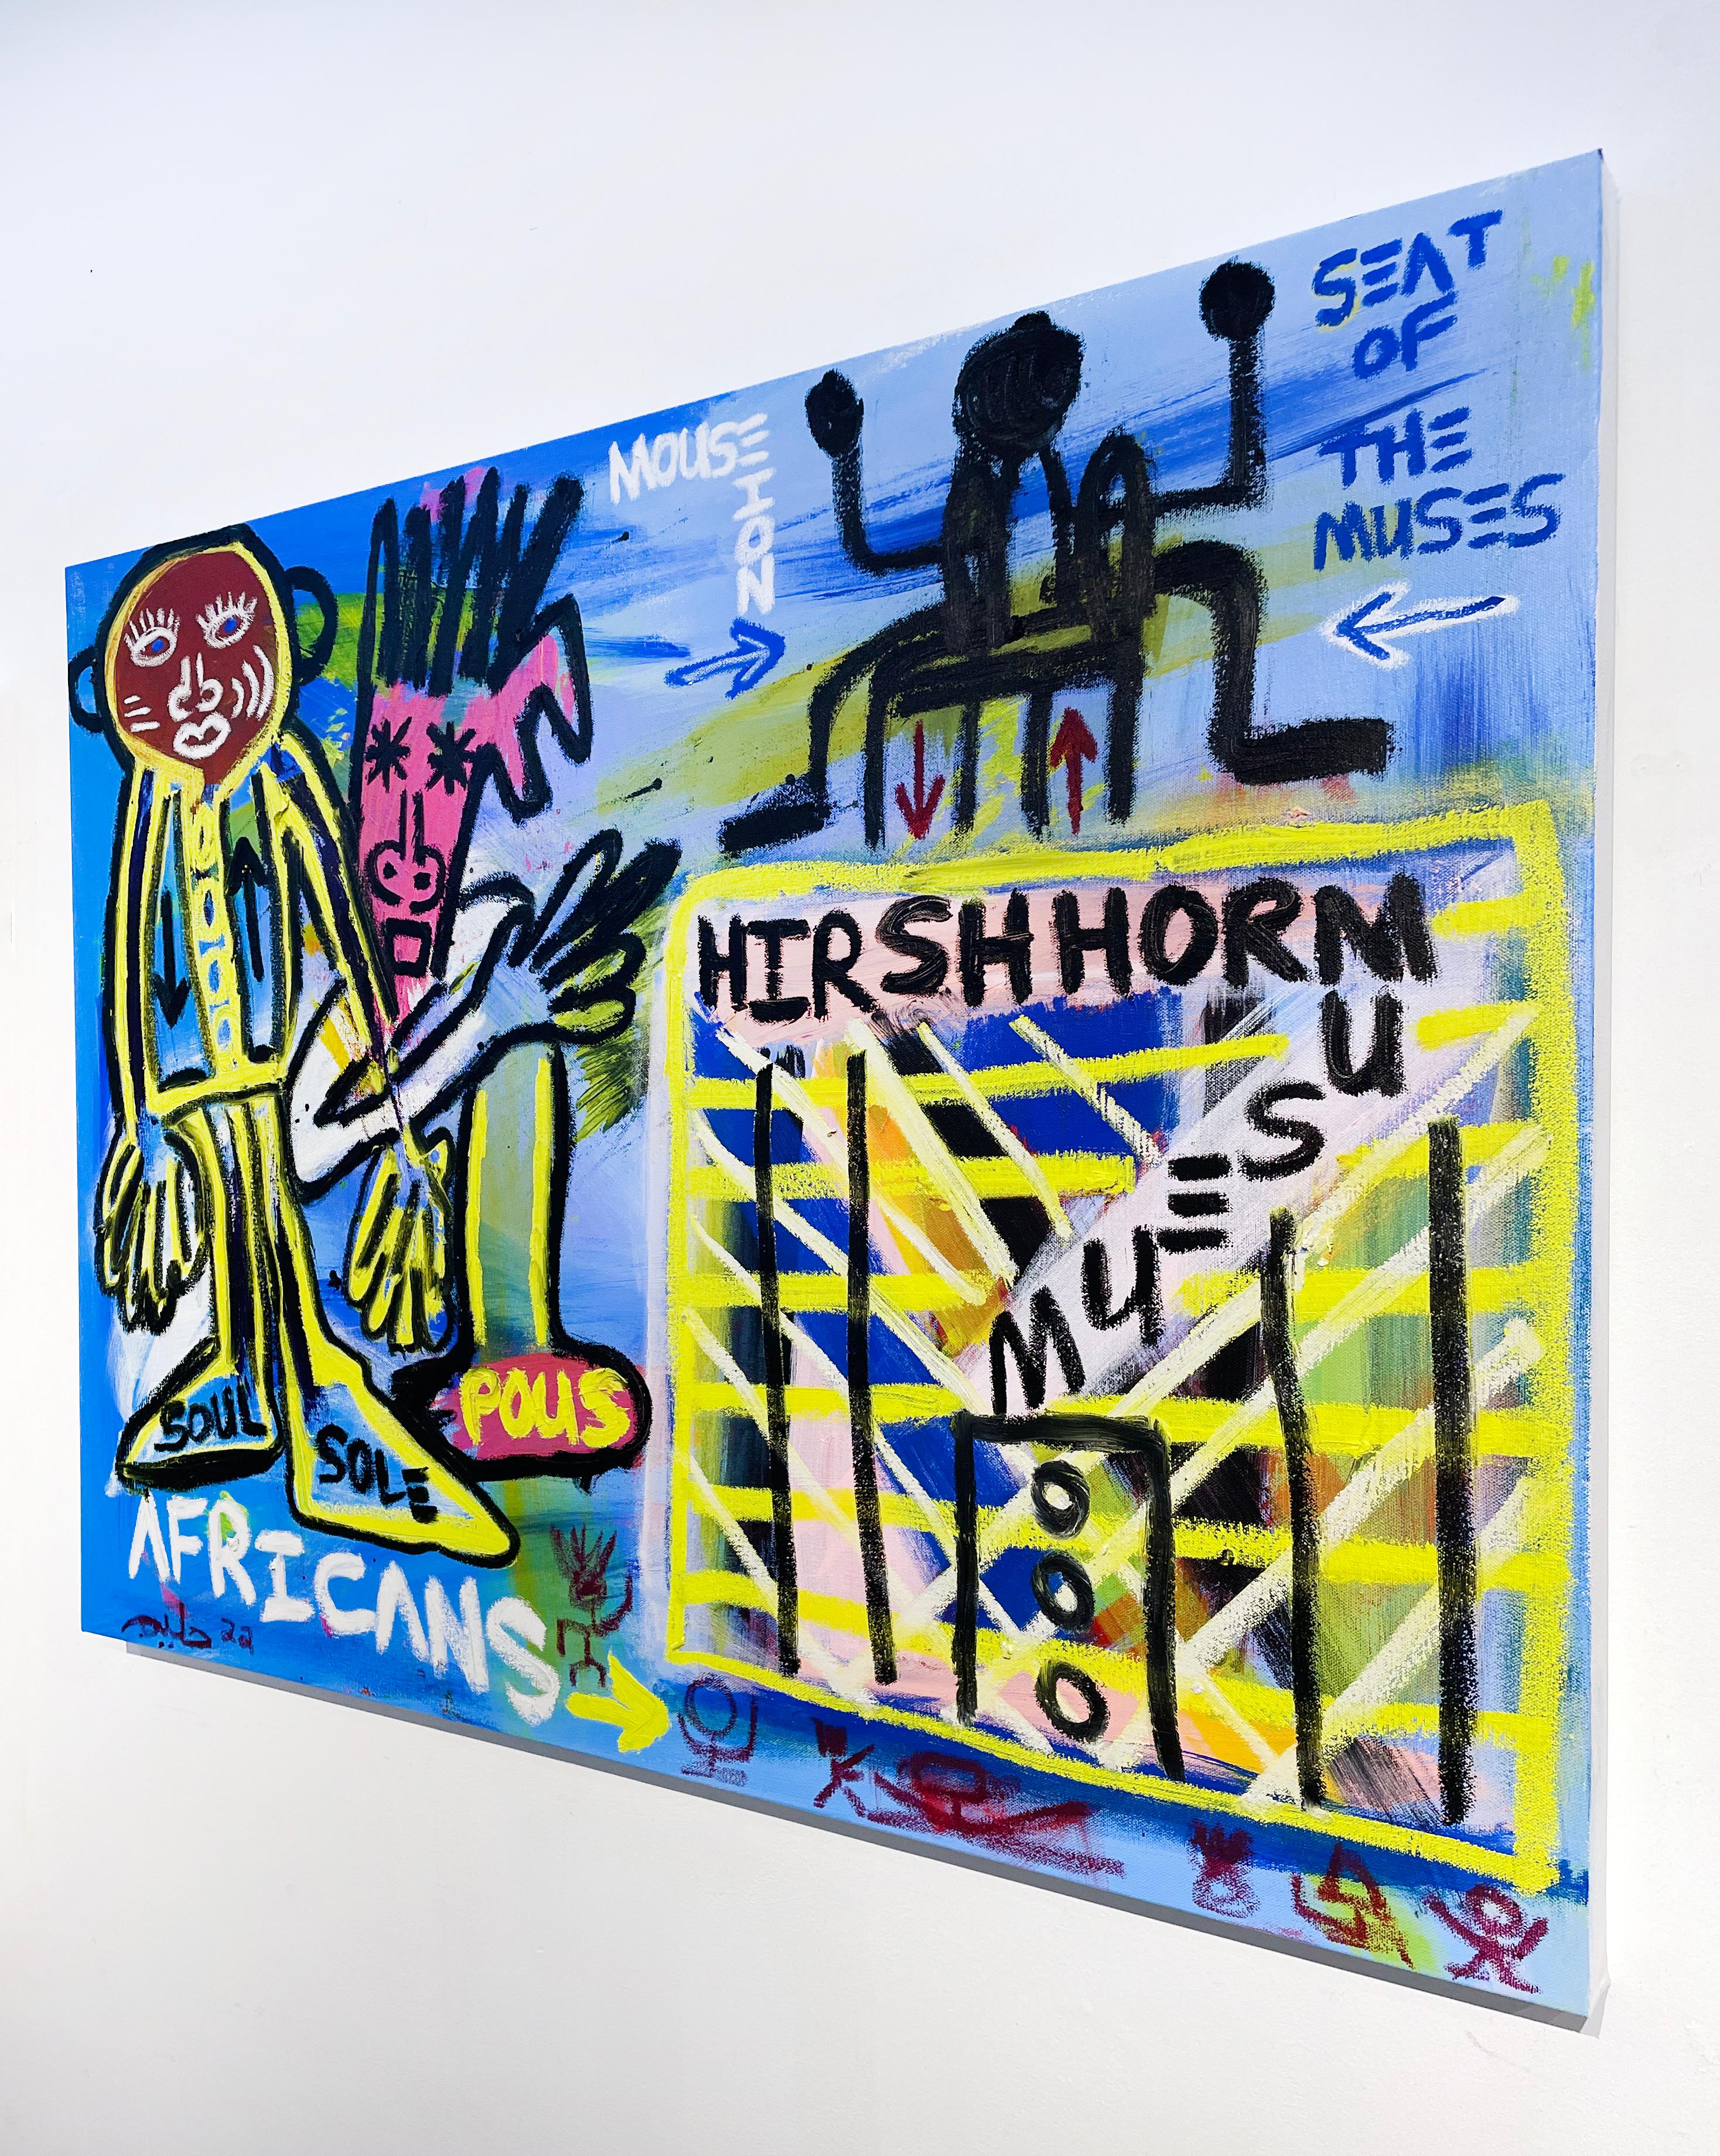 Africans at the Hirshhorn Museum 1